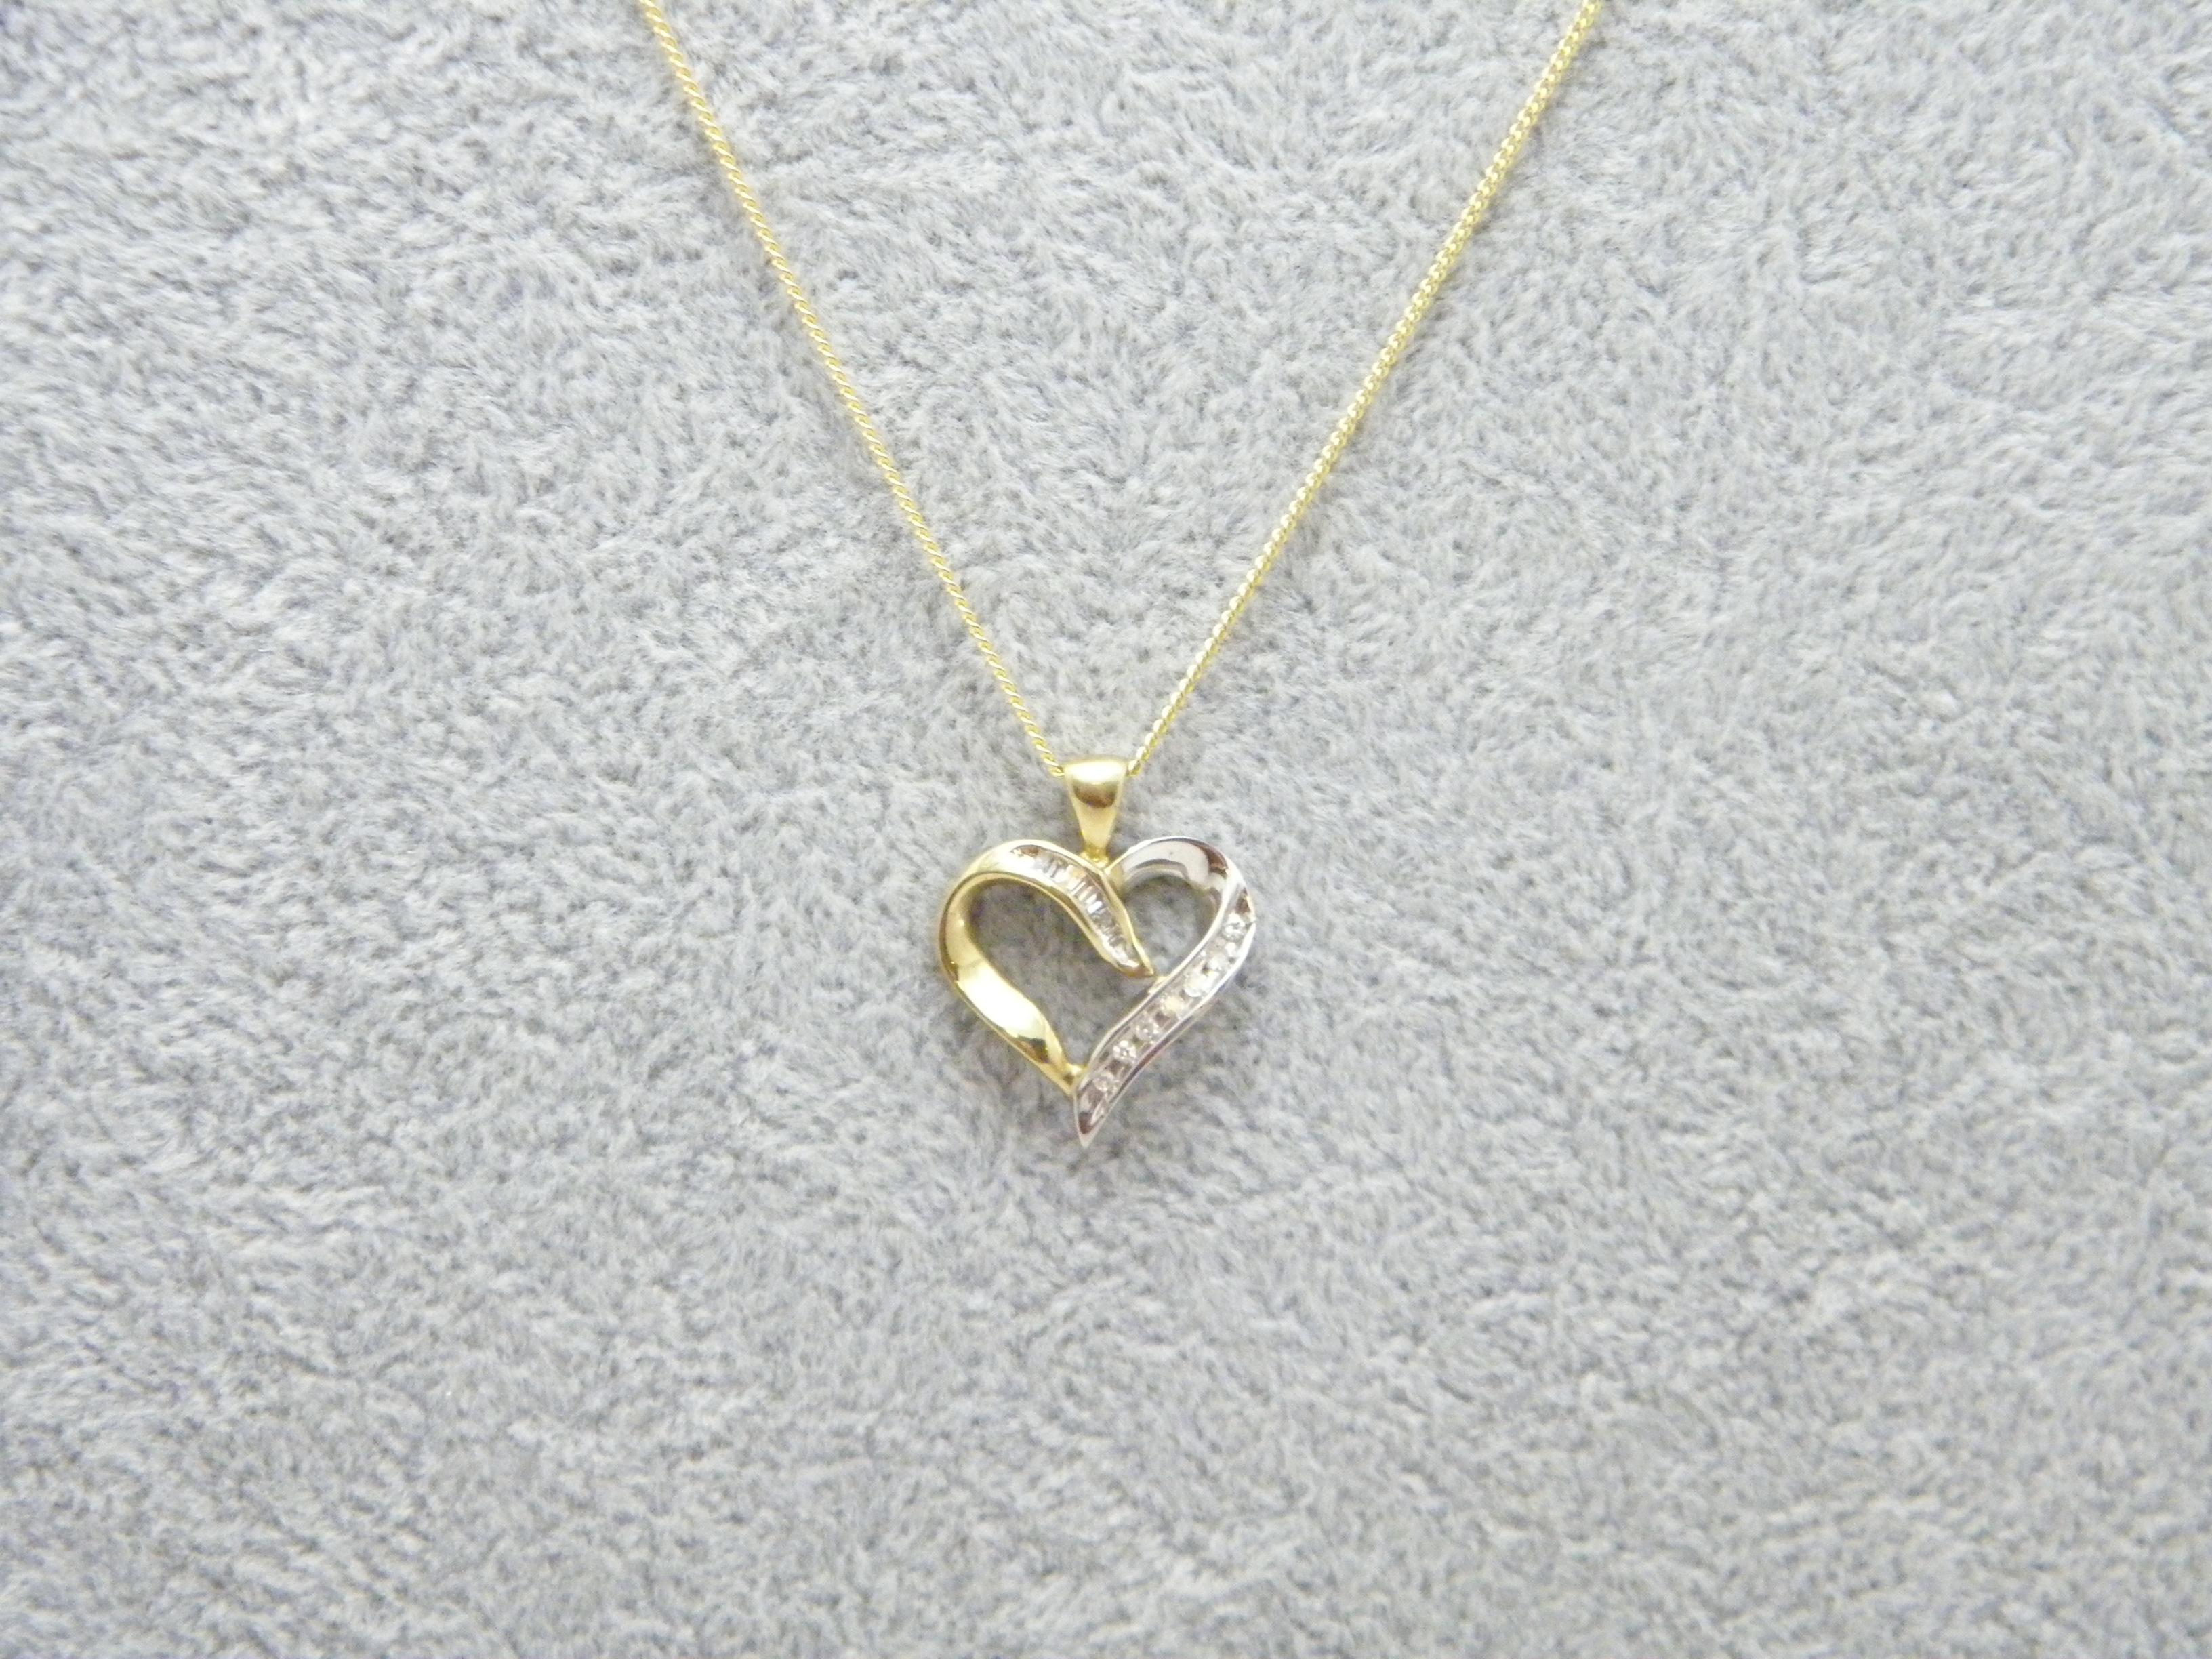 If you have landed on this page then you have an eye for beauty.

On offer is this gorgeous

9CT GOLD 0.25 CARAT DIAMOND HEART PENDANT NECKLACE

PENDANT DESCRIPTION
DETAILS
Material: Solid 9ct (375/000) yellow and white gold (Actually 10ct but we do